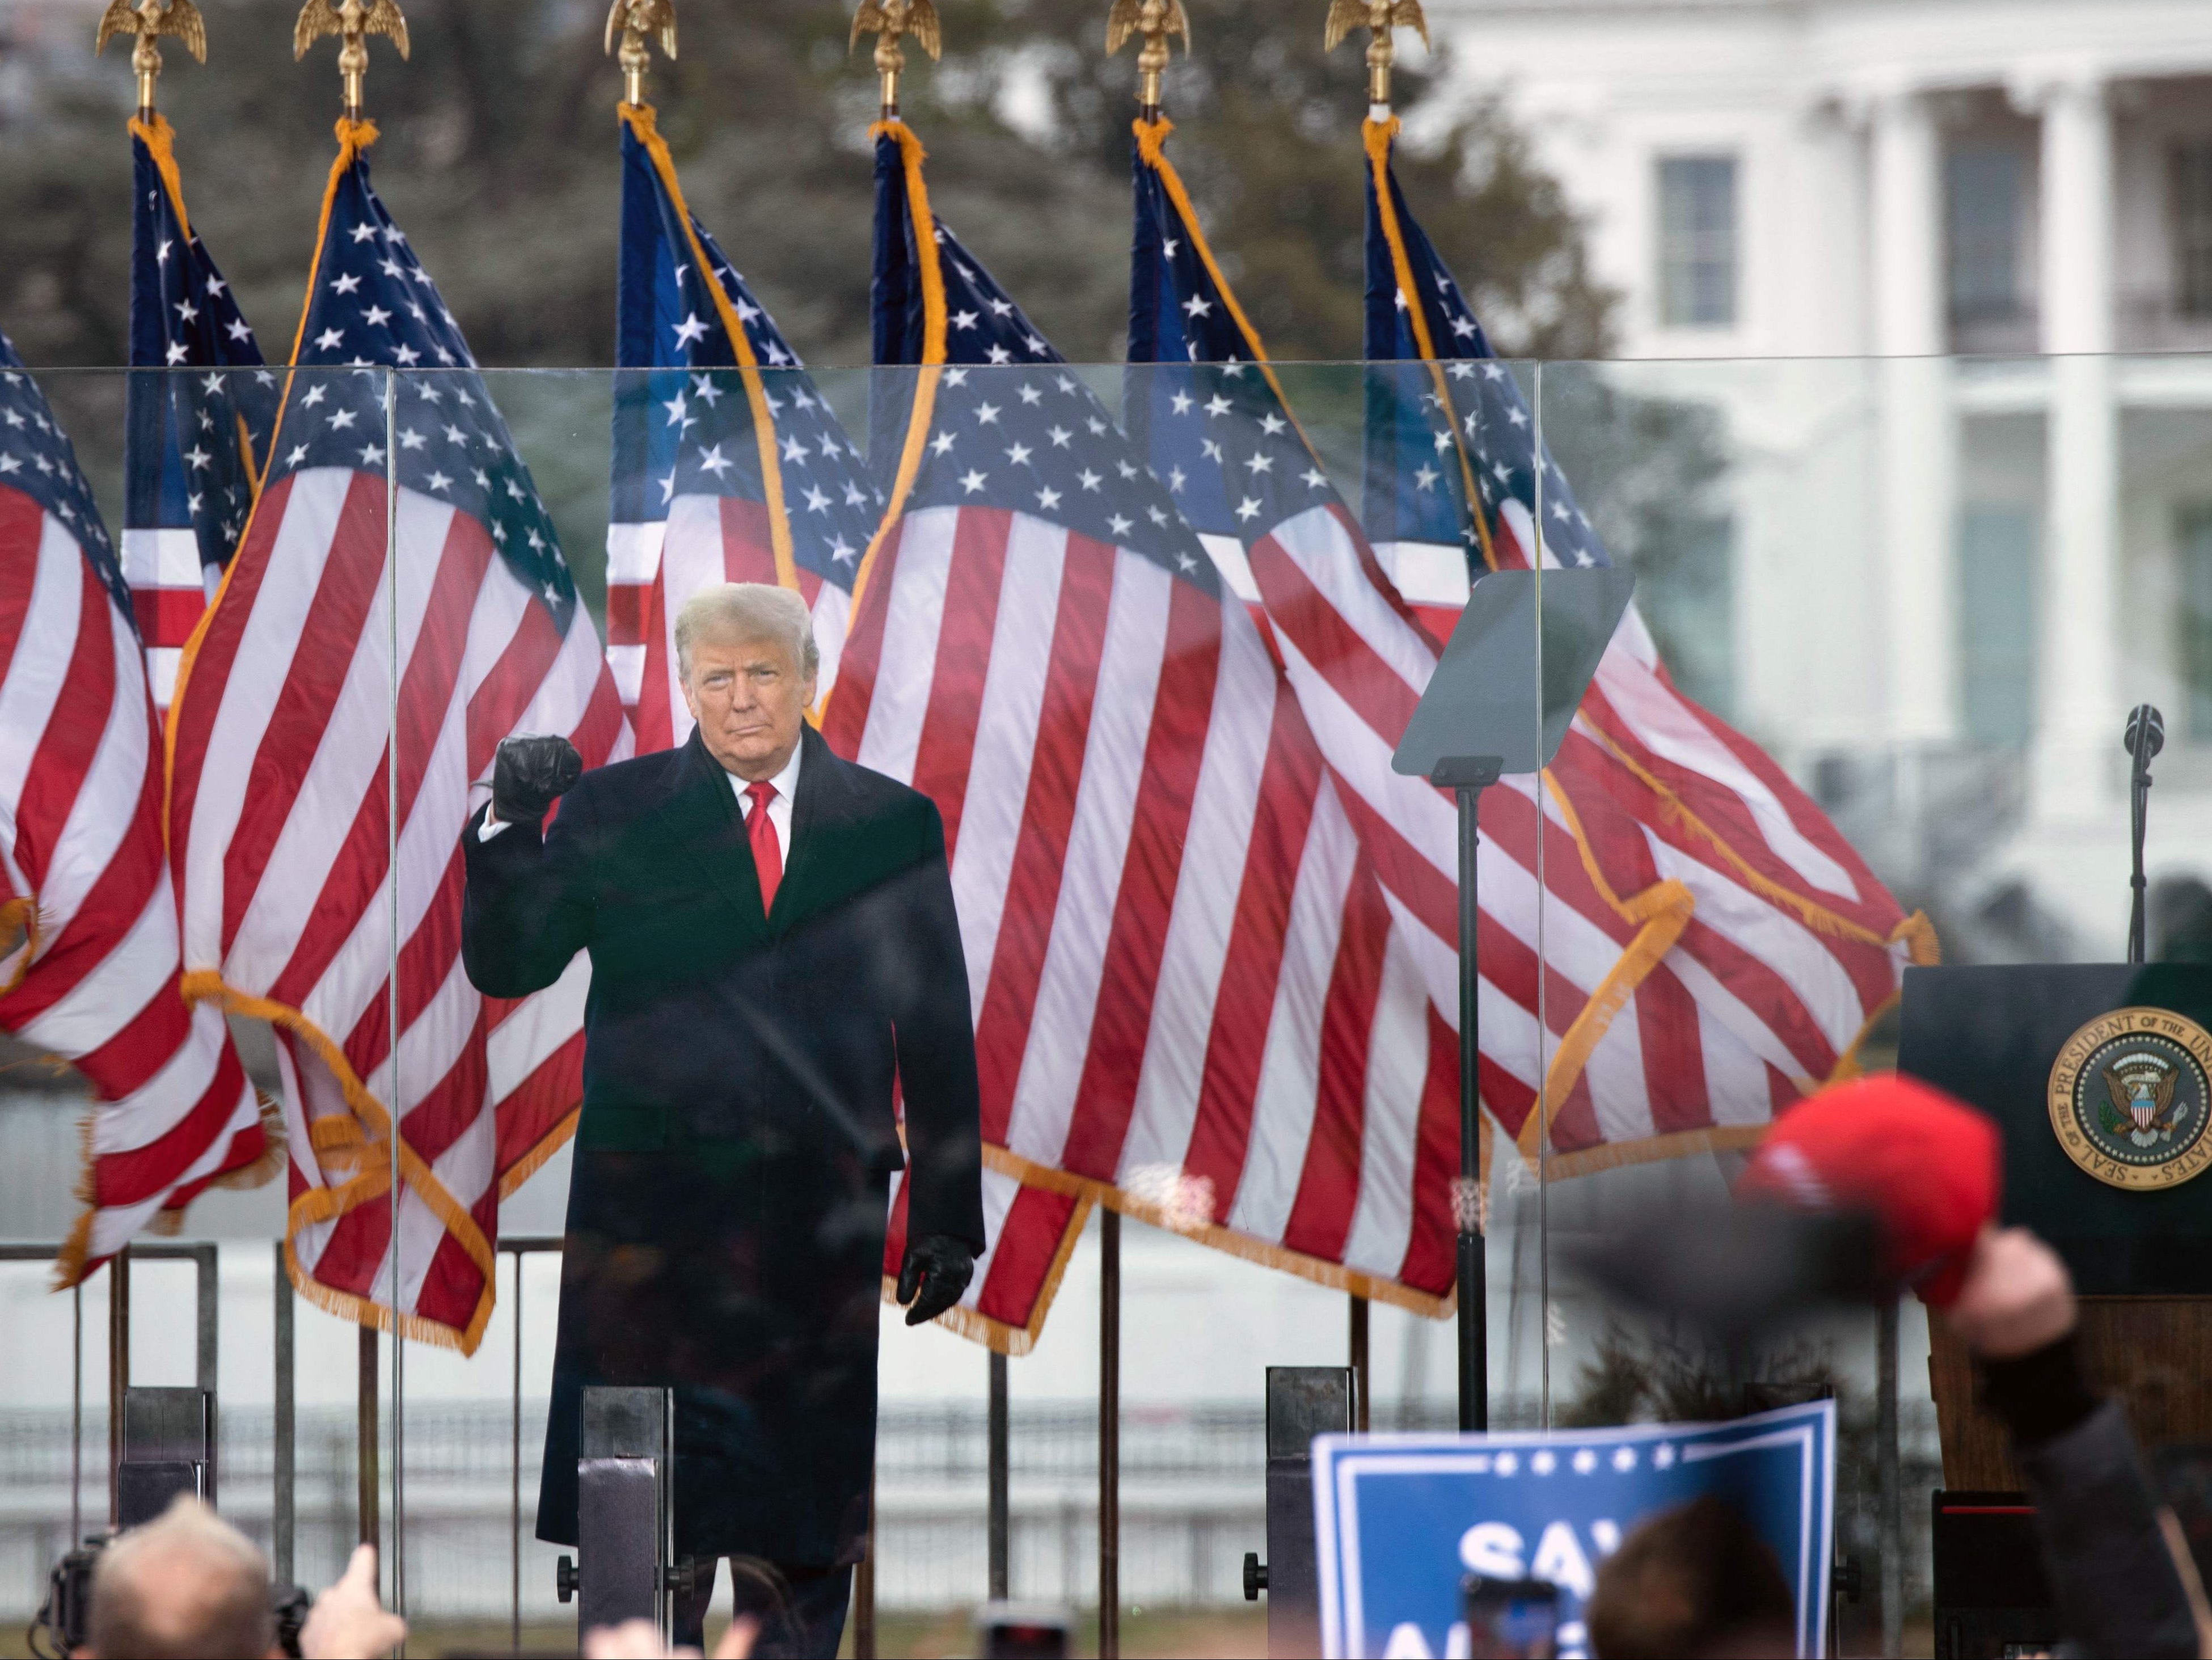 Donald Trump rallies supporters outside the White House on 6 January 2021